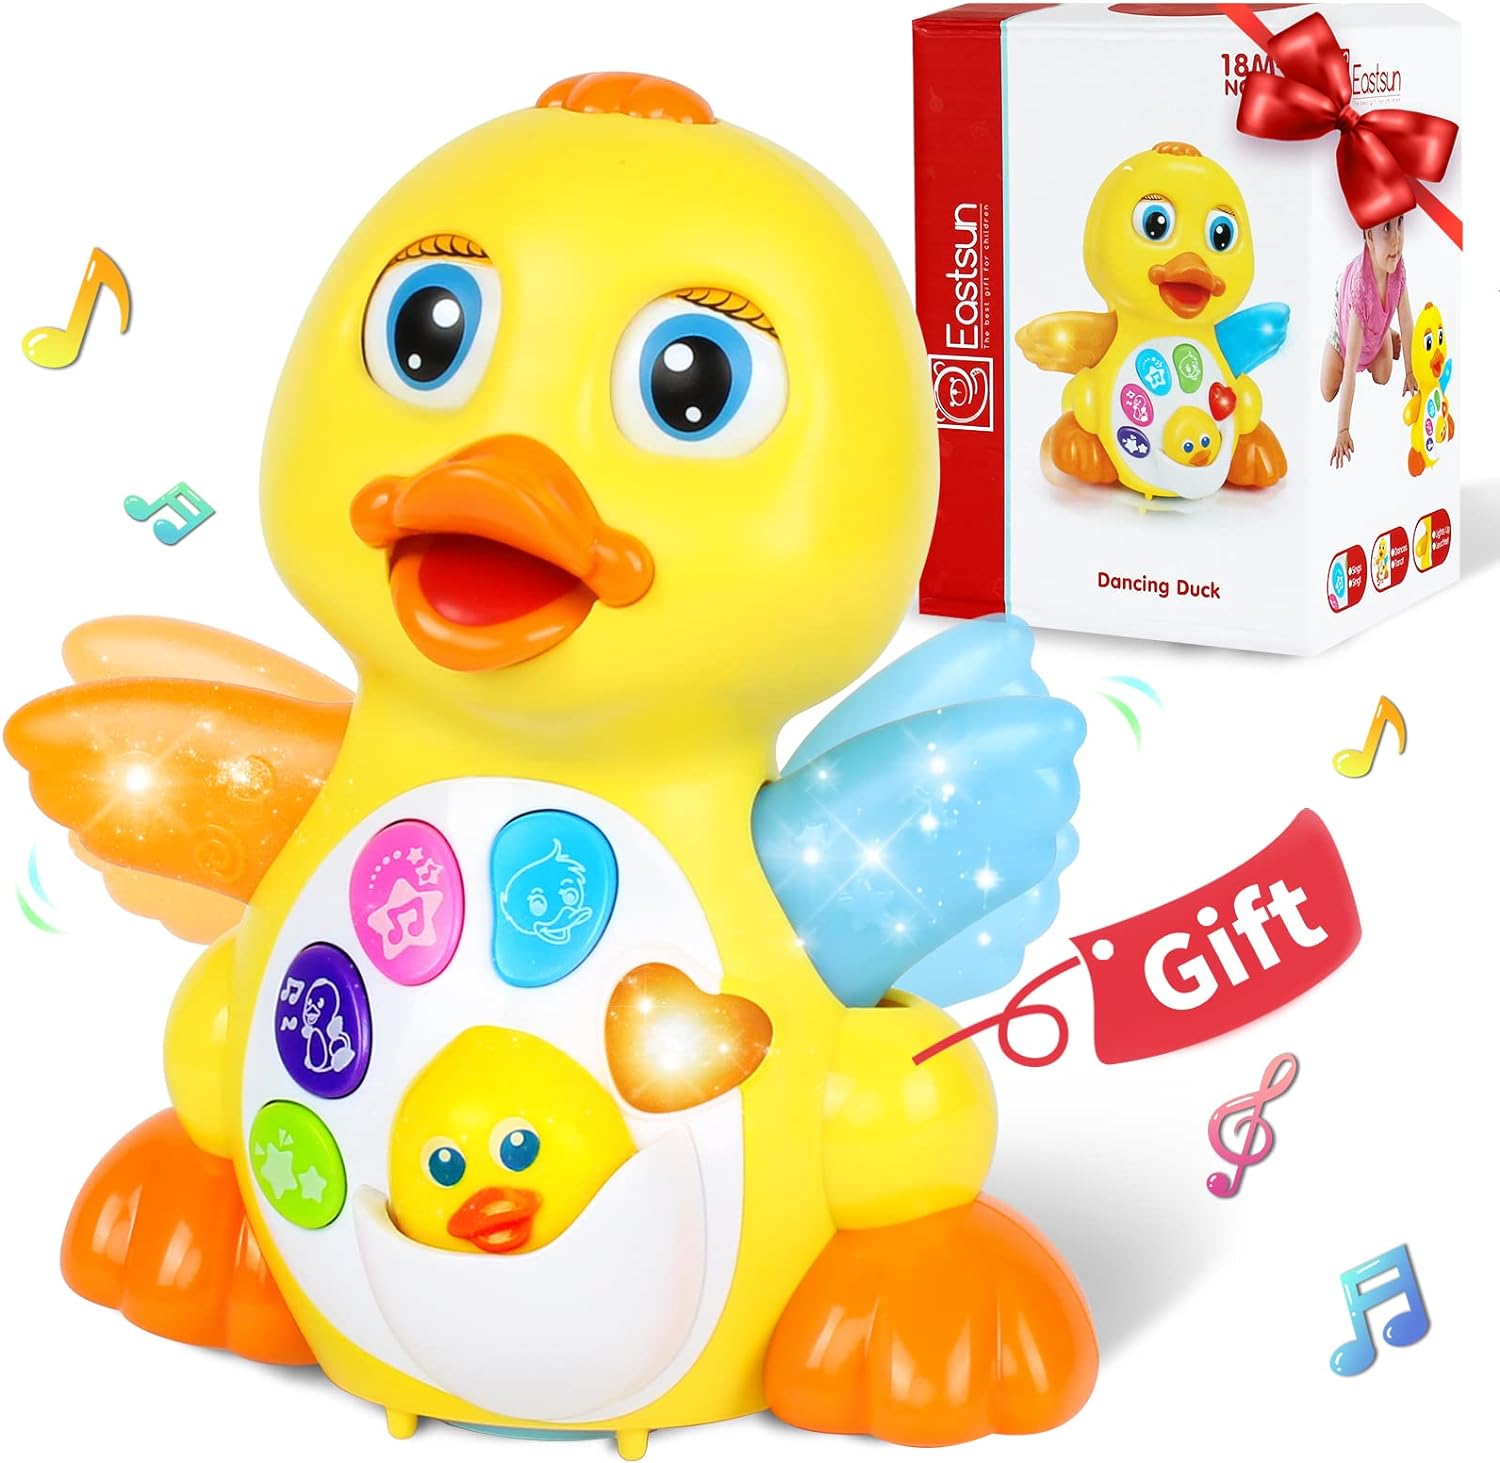 6 in 1 Baby Toys 1 Year Old Girls Boy Gifts,6 Months Plus,Light Up Music Singing Dancing Crawling Walking Interactive Yellow Duck Toy 6 12 18 months,1 year old girl baby Toddlers gifts,1st birthday